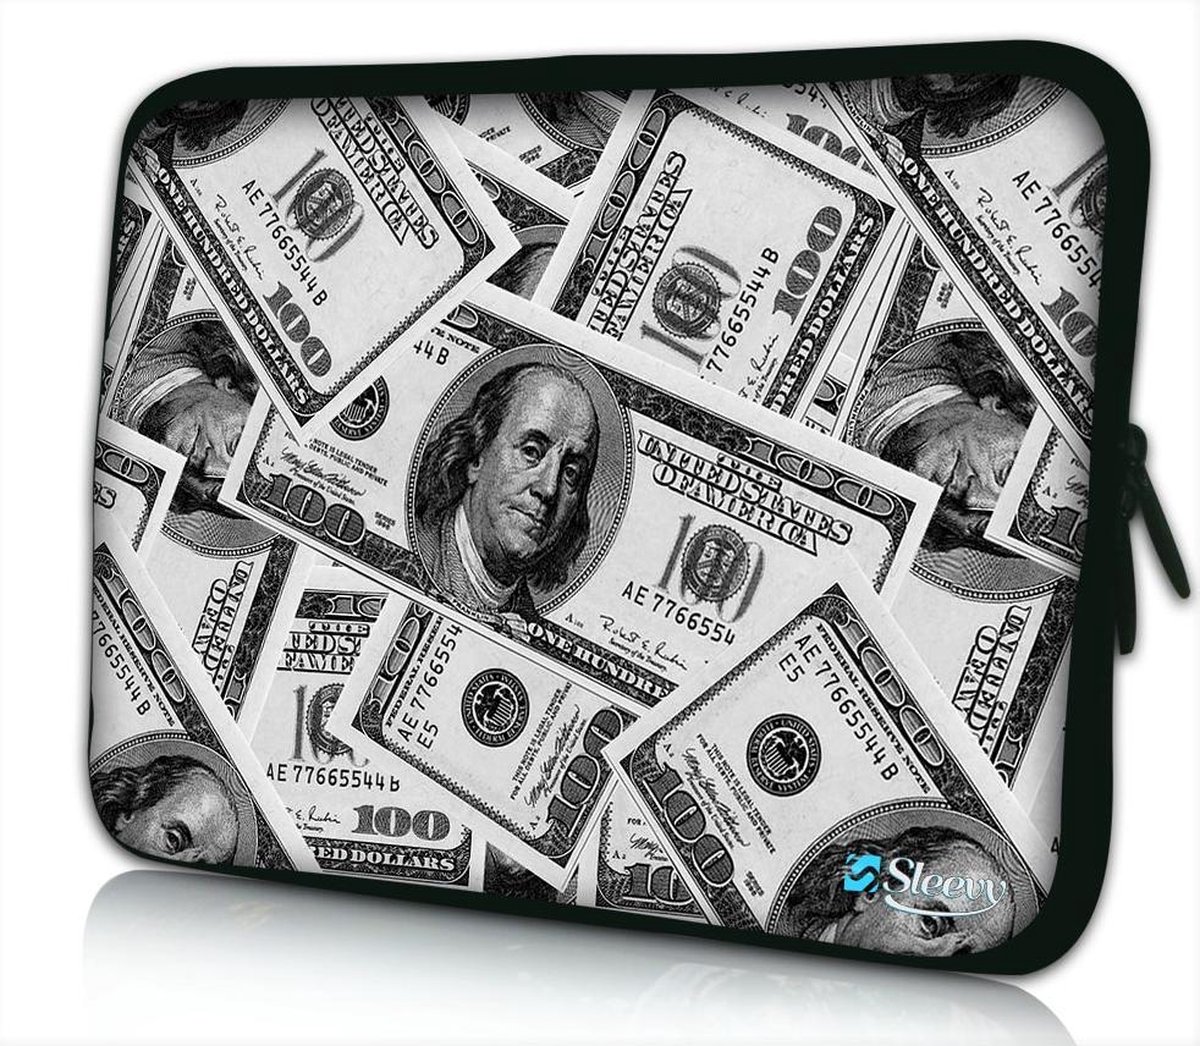 Sleevy 13.3 laptophoes dollars - laptop sleeve - Sleevy collectie 300+ designs